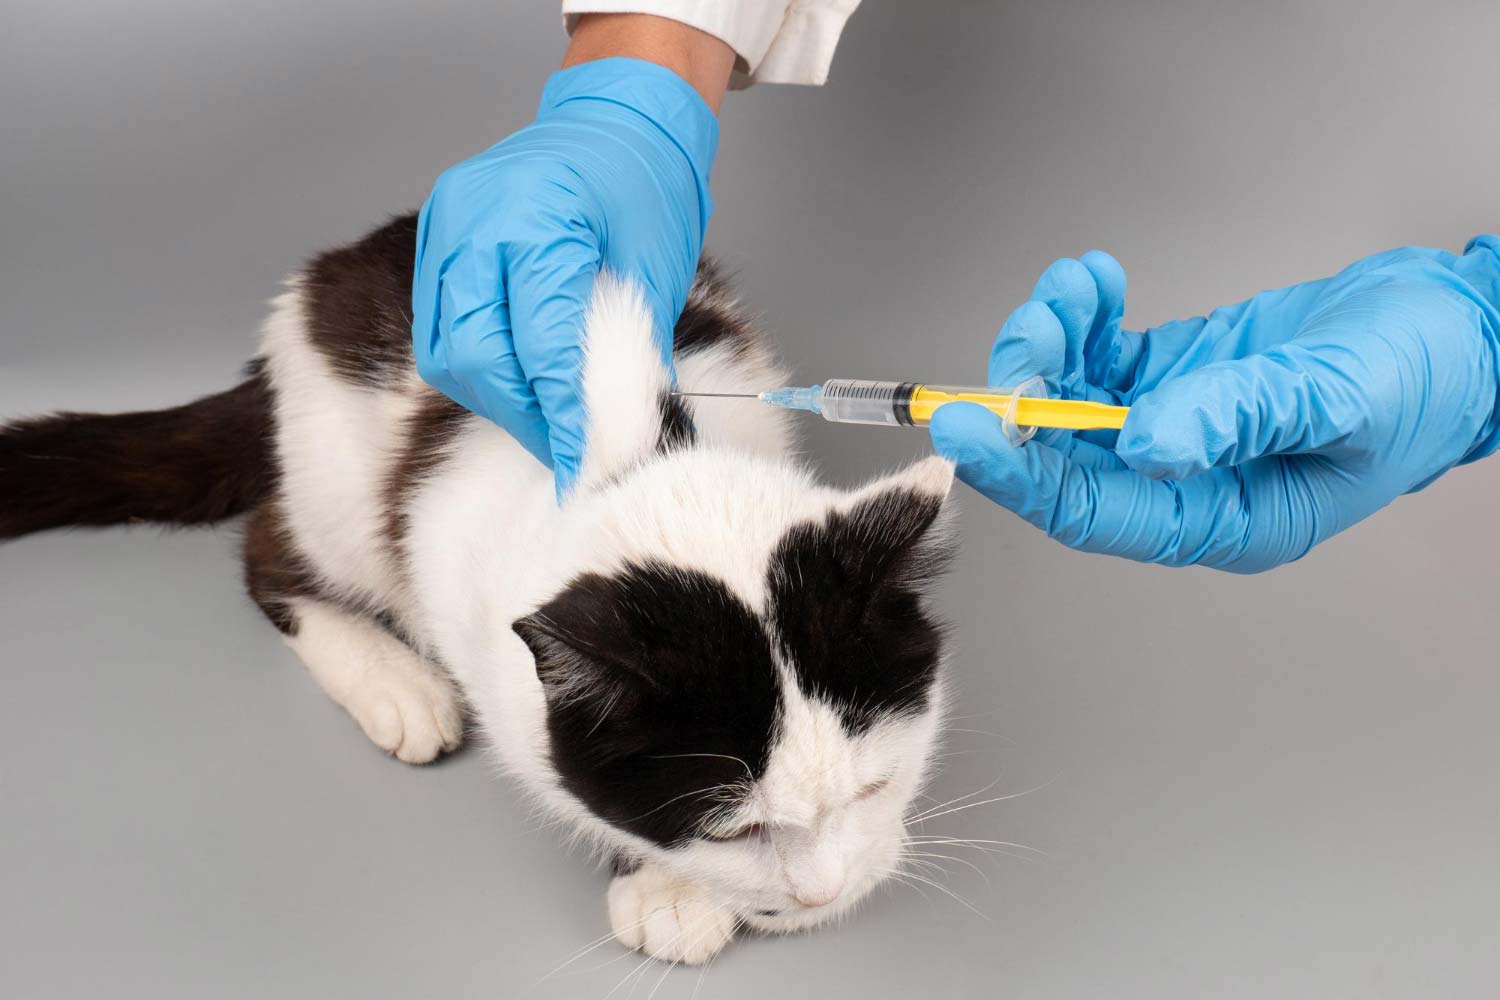 Veterinarian doctor hand giving a cat an injection with a syringe